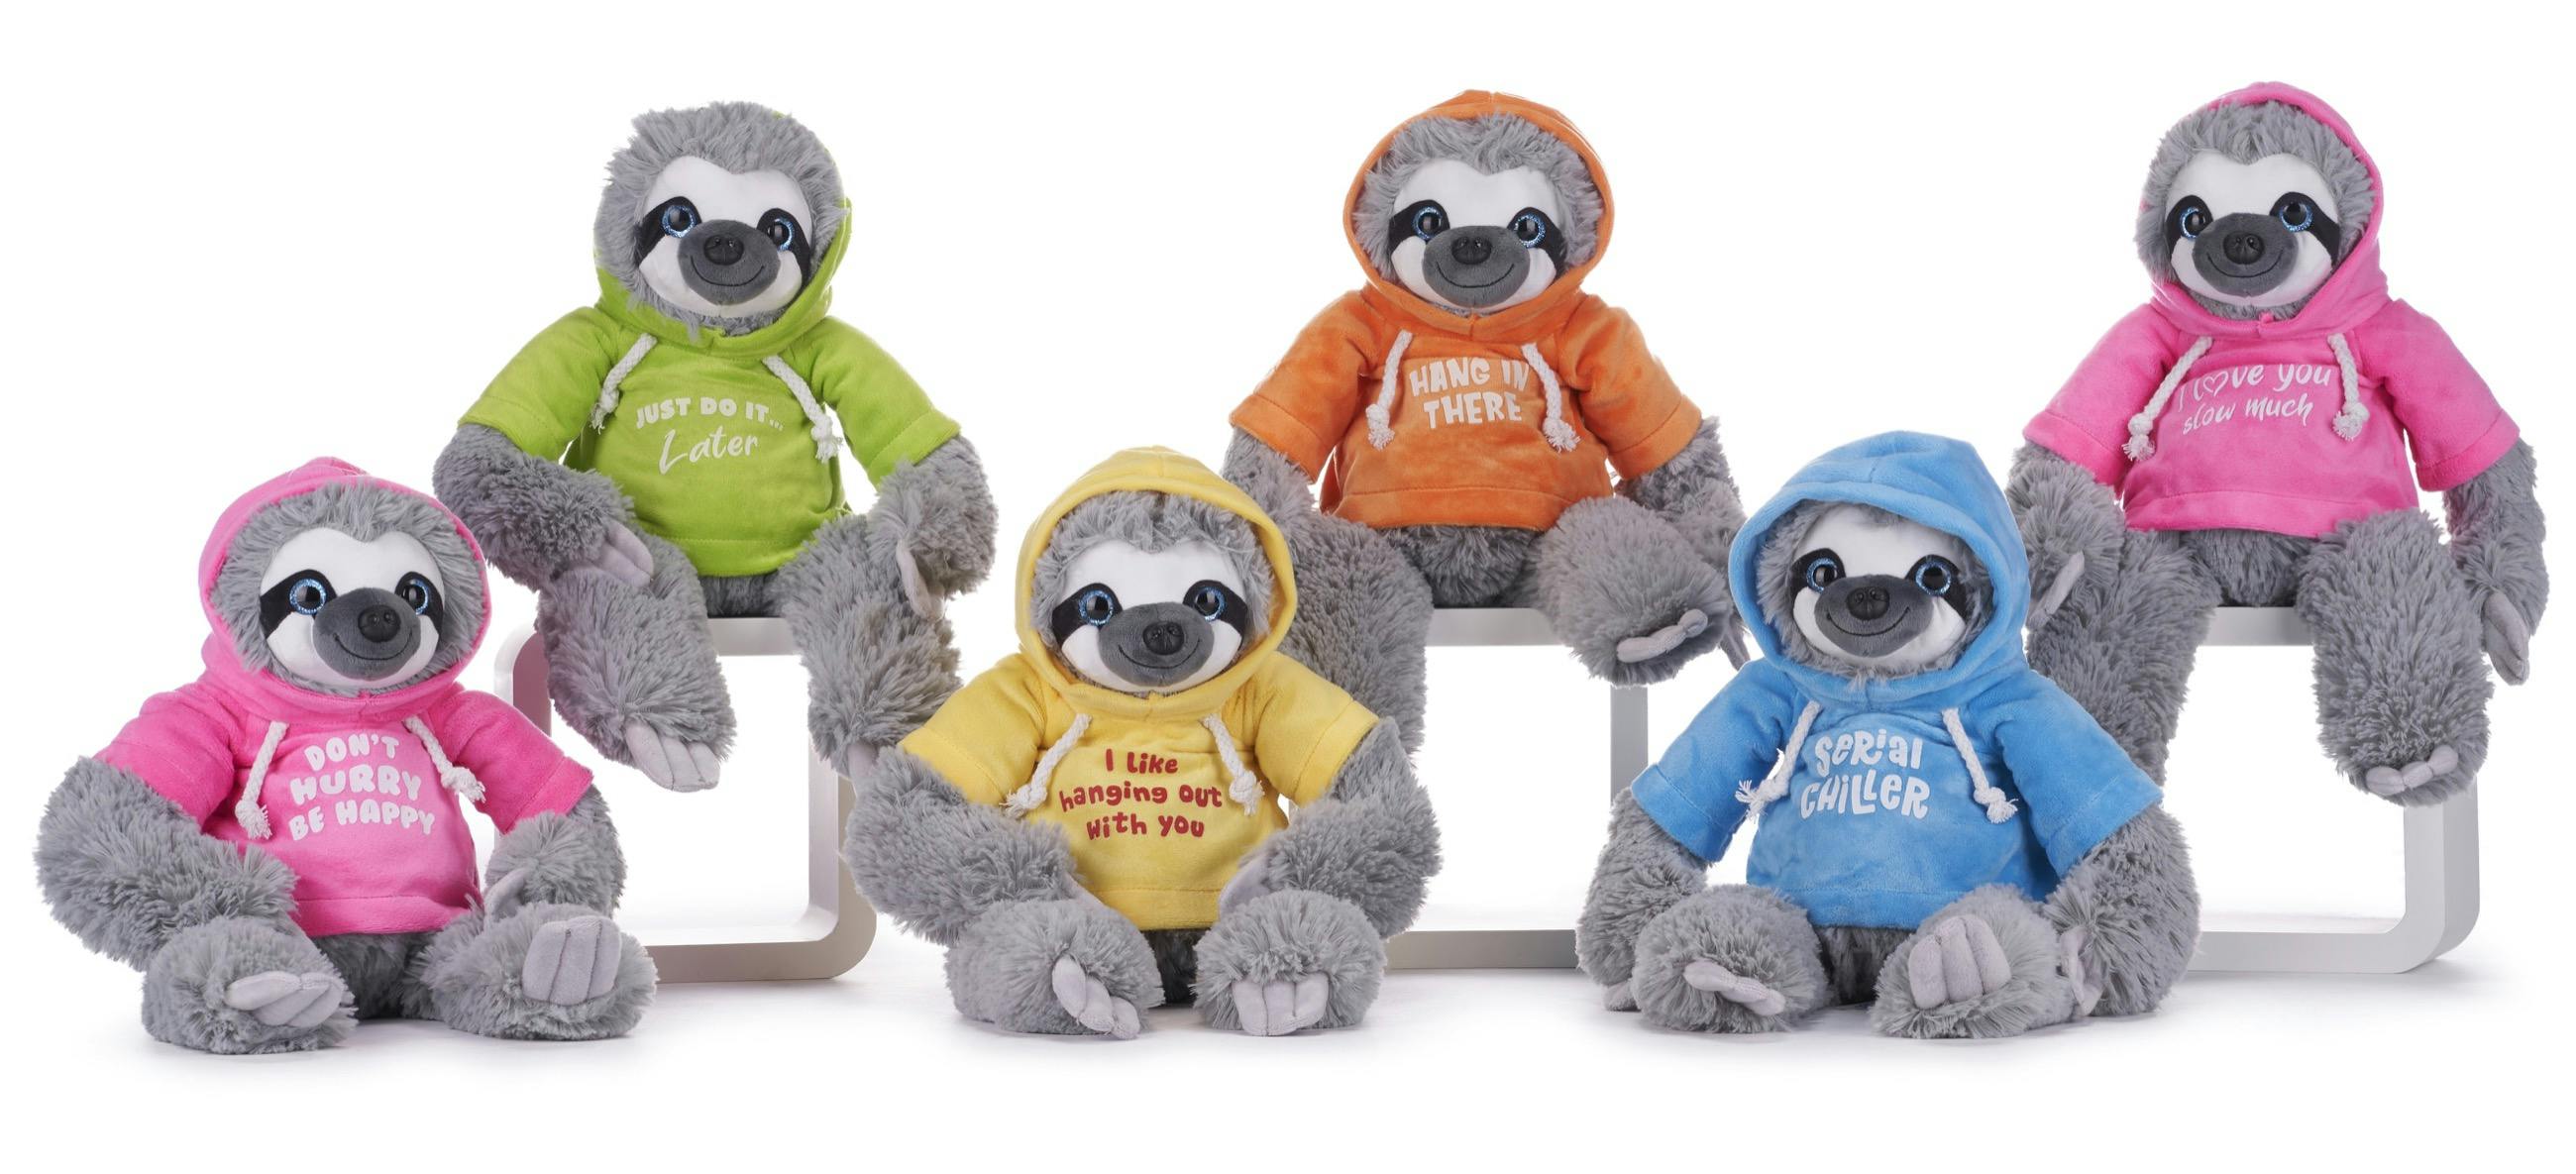 Product - Sloth Sitting in Bright Hoodies 6 Ass